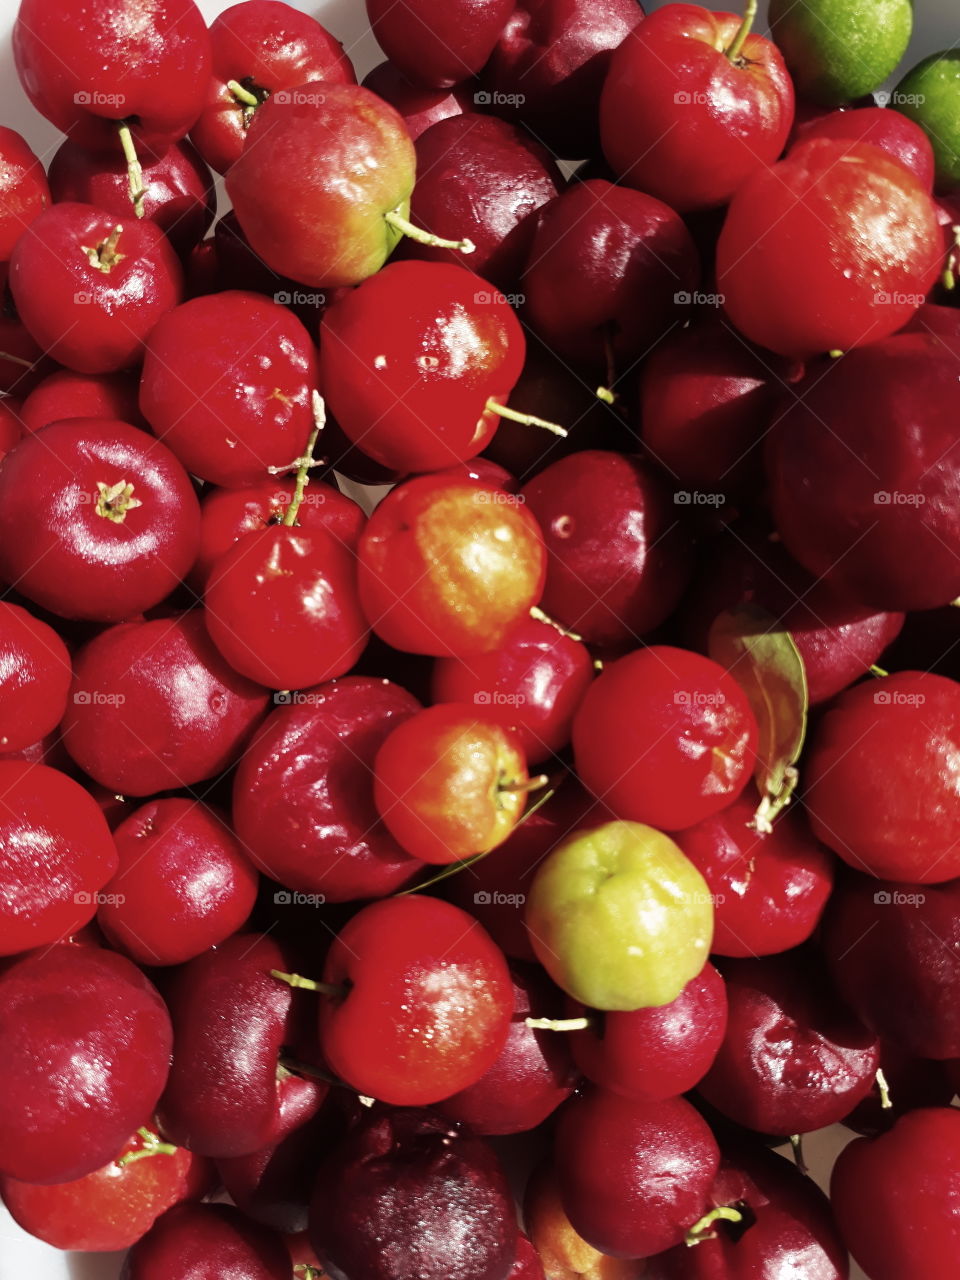 The acerola, azerola, parsnip, cherry-de-barbados or cherry-of-the-Antilles is a shrub of the Malpighiaceae family. The fruit is in a tree called Aceroleira. It originates in the Antilles, Central America and northern South America